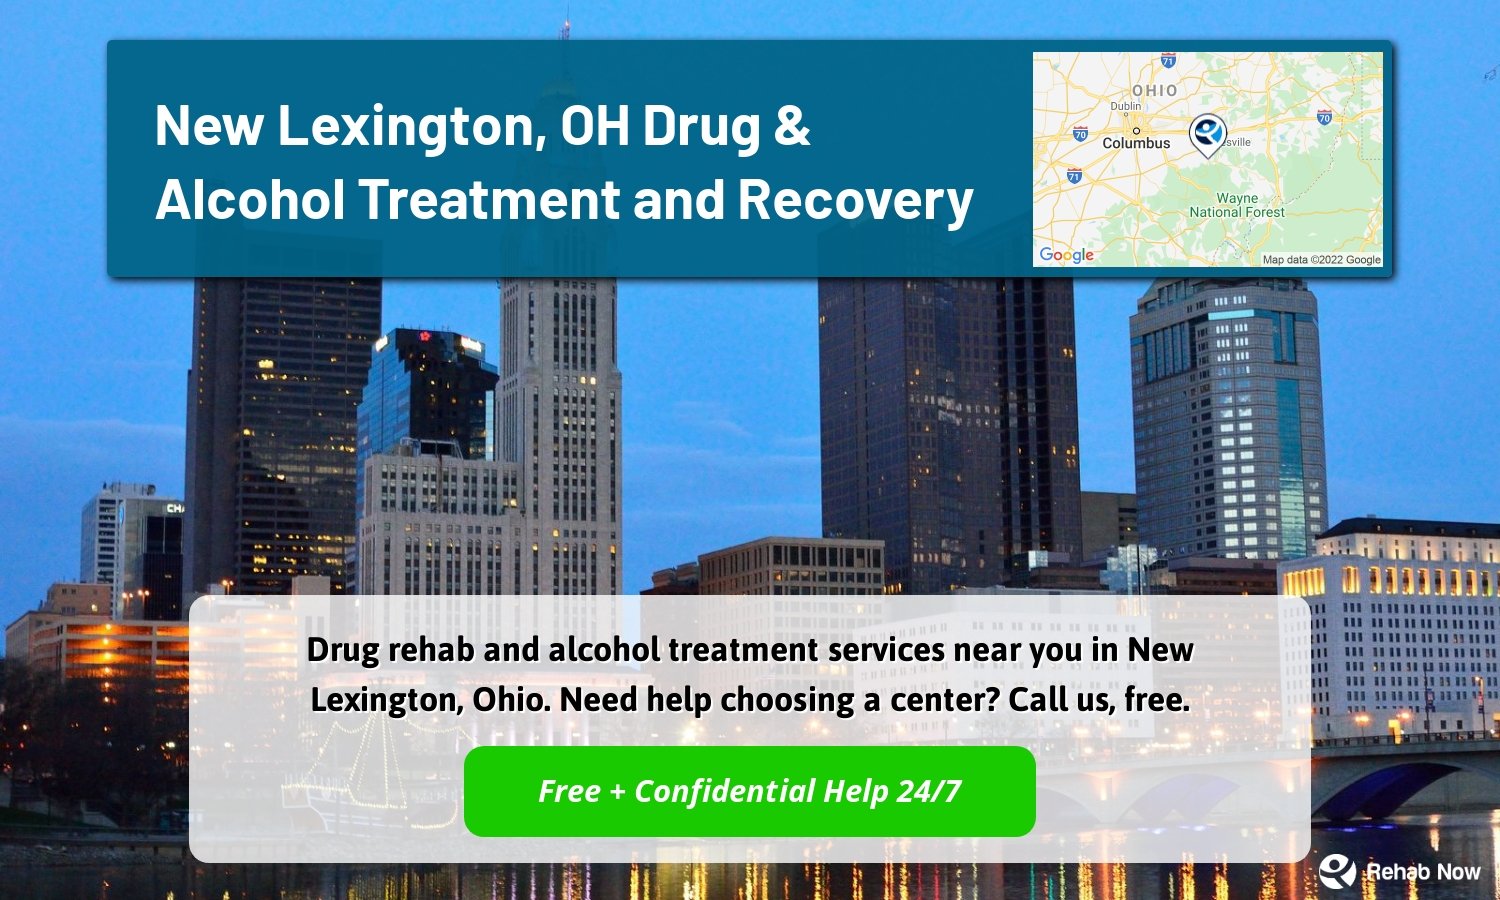 Drug rehab and alcohol treatment services near you in New Lexington, Ohio. Need help choosing a center? Call us, free.